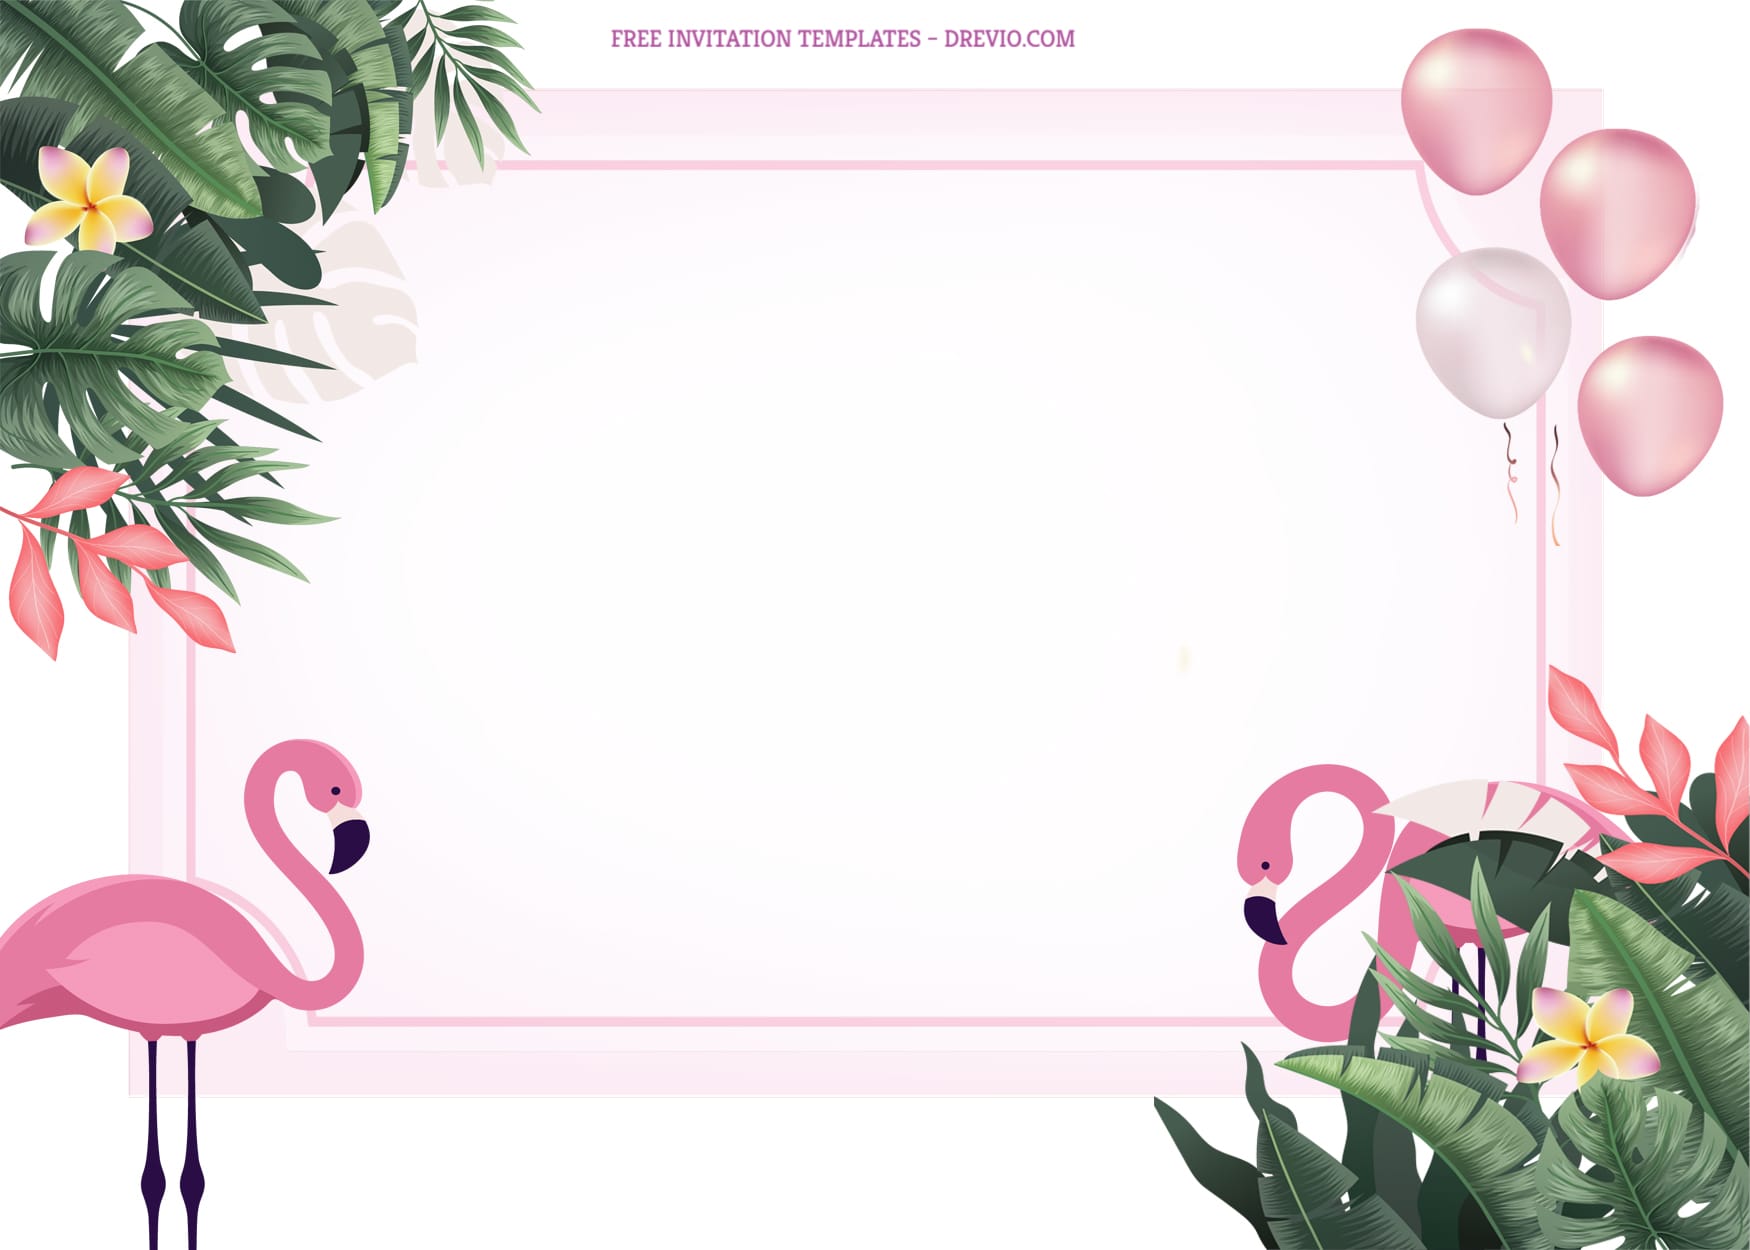 8+ Sweet Summer Flamingo Birthday Invitation Templates With Stance And Hiding Flamingo